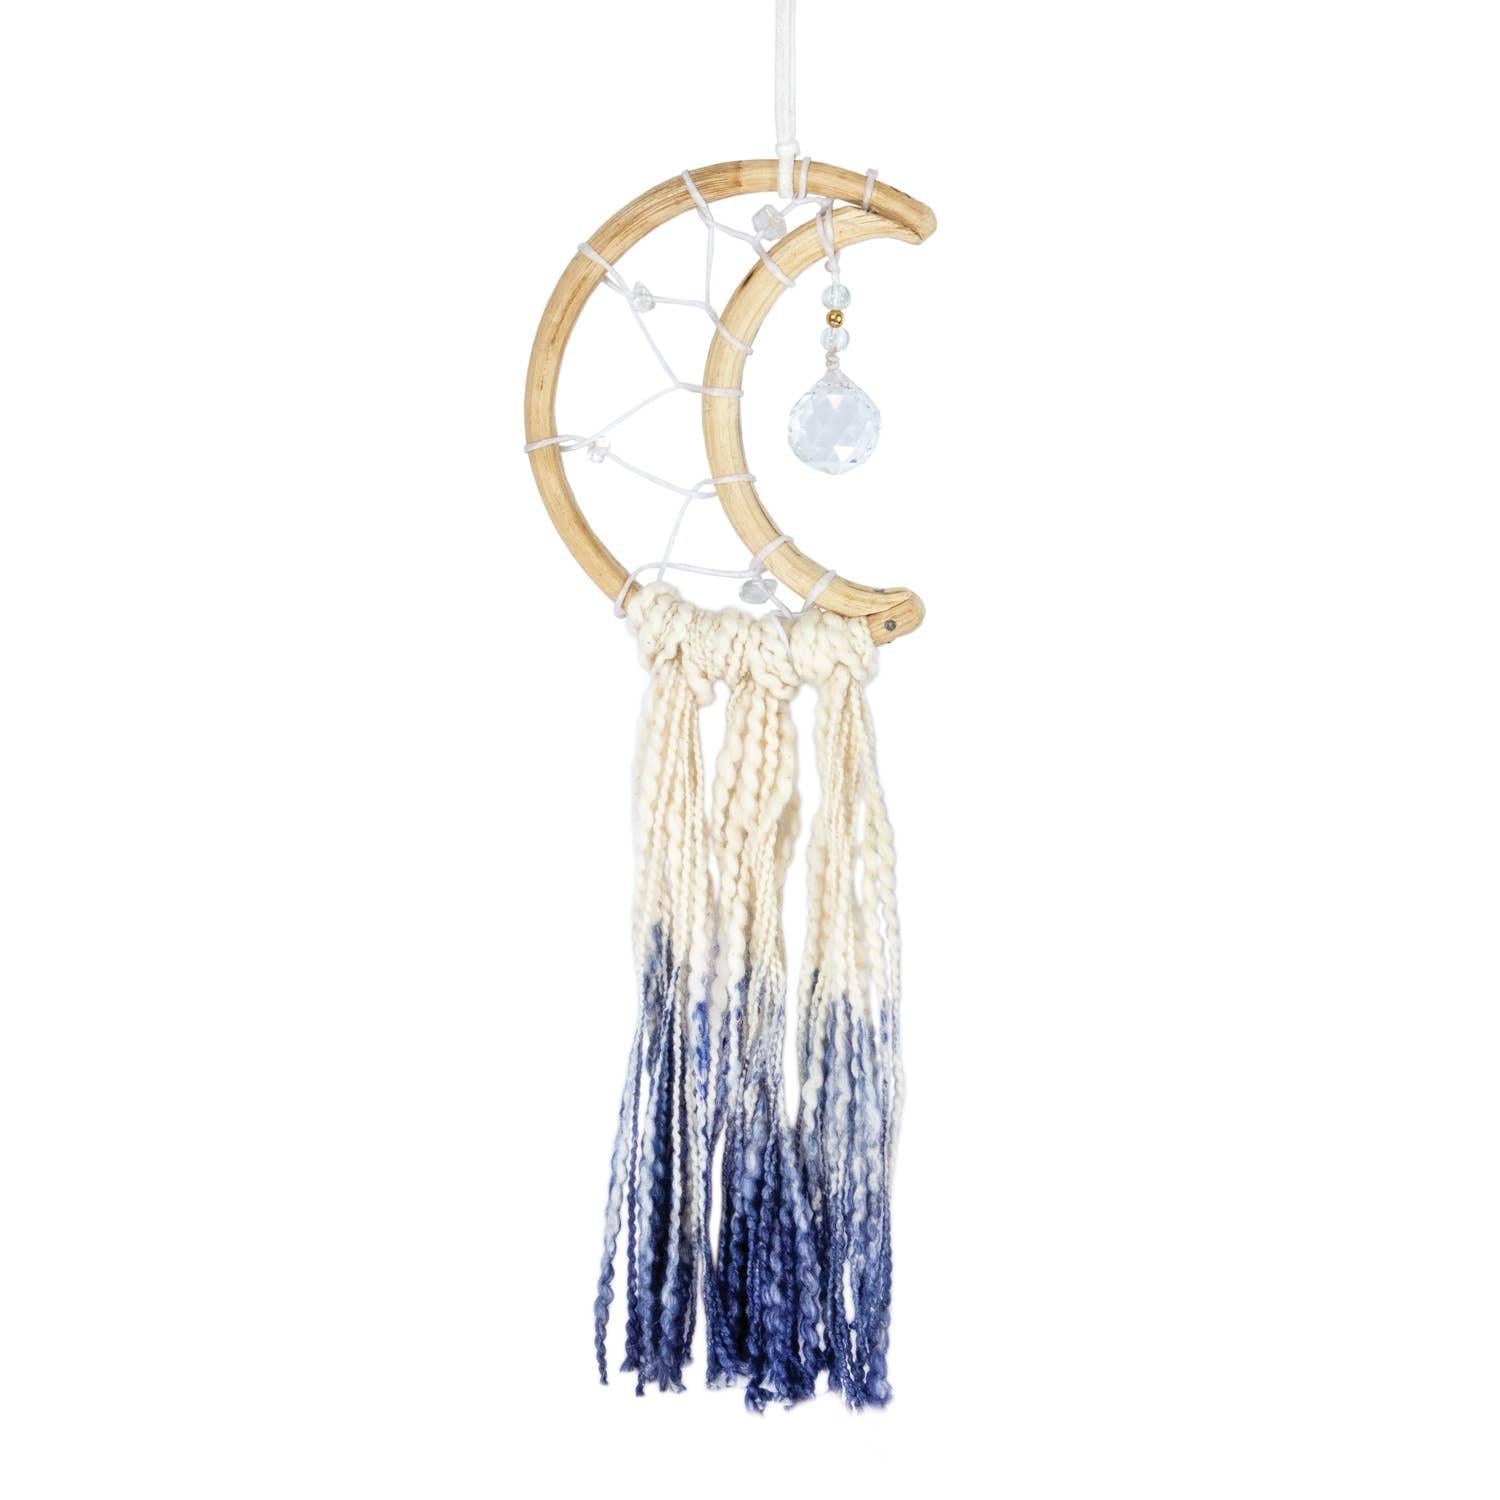 Little Blue Moon Wall Decor Uni-T Small Gifts